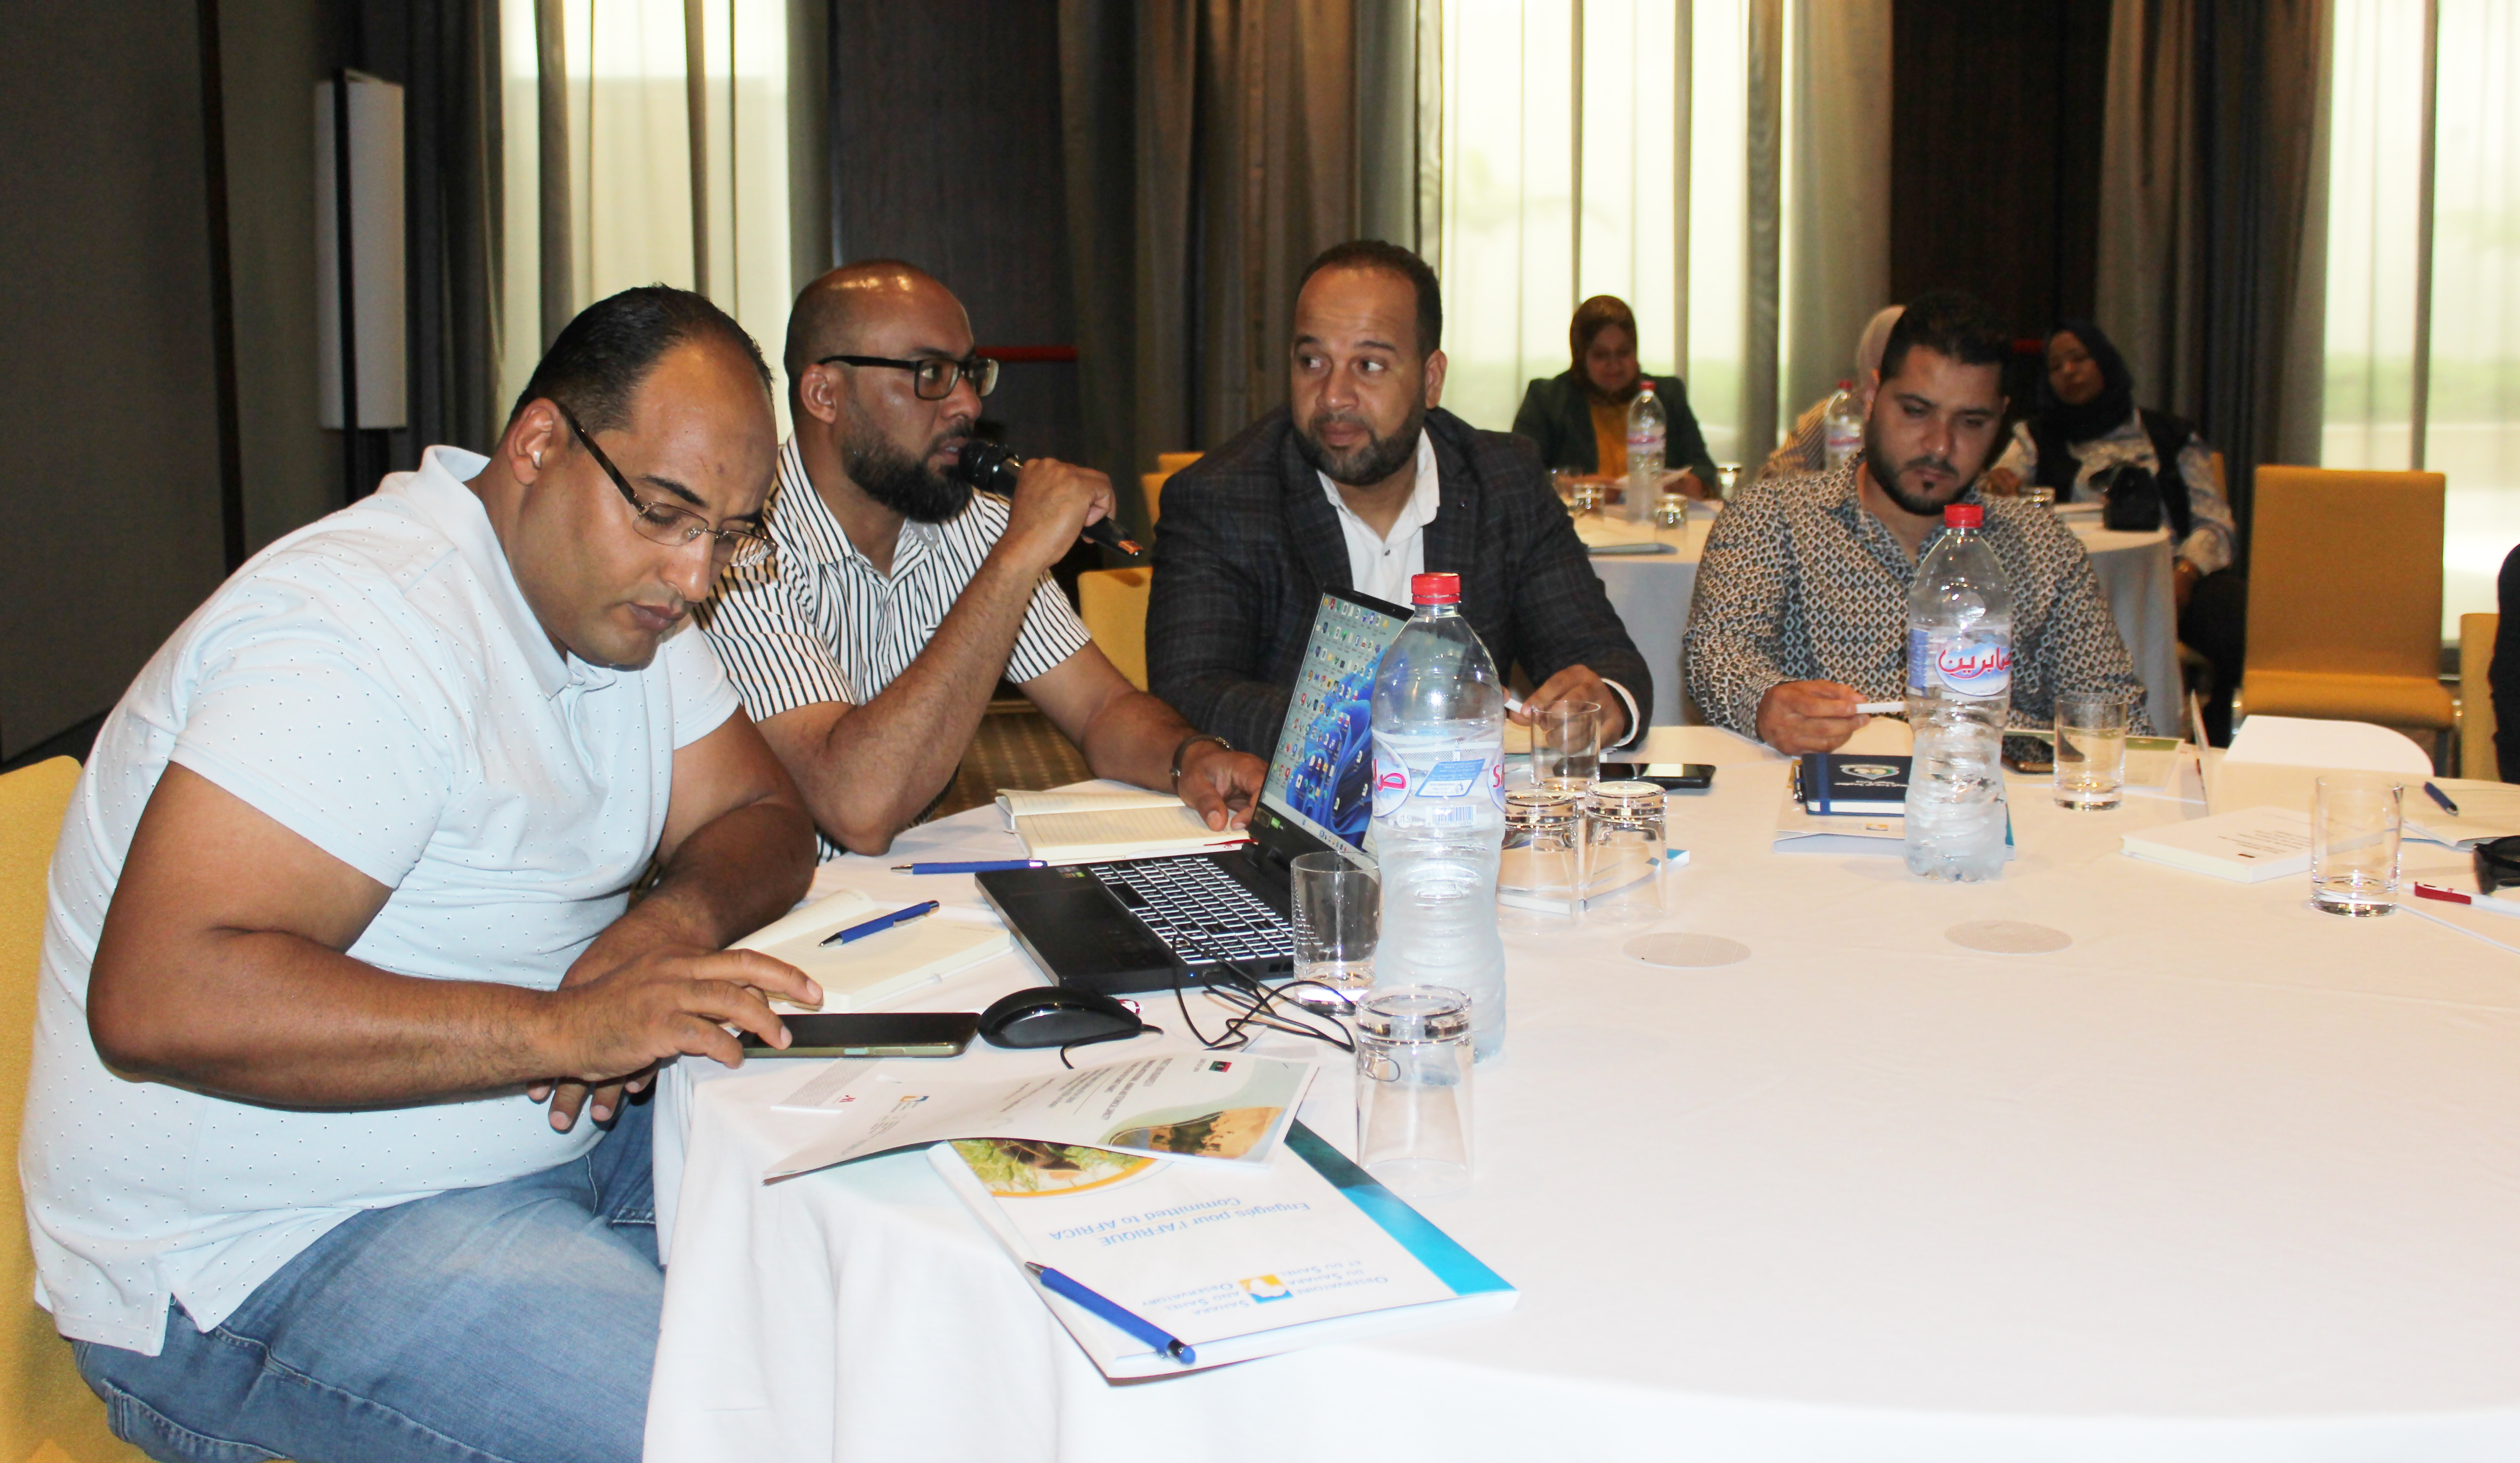 Readiness-Libya II | Capacity building workshop for the National Designated Authority